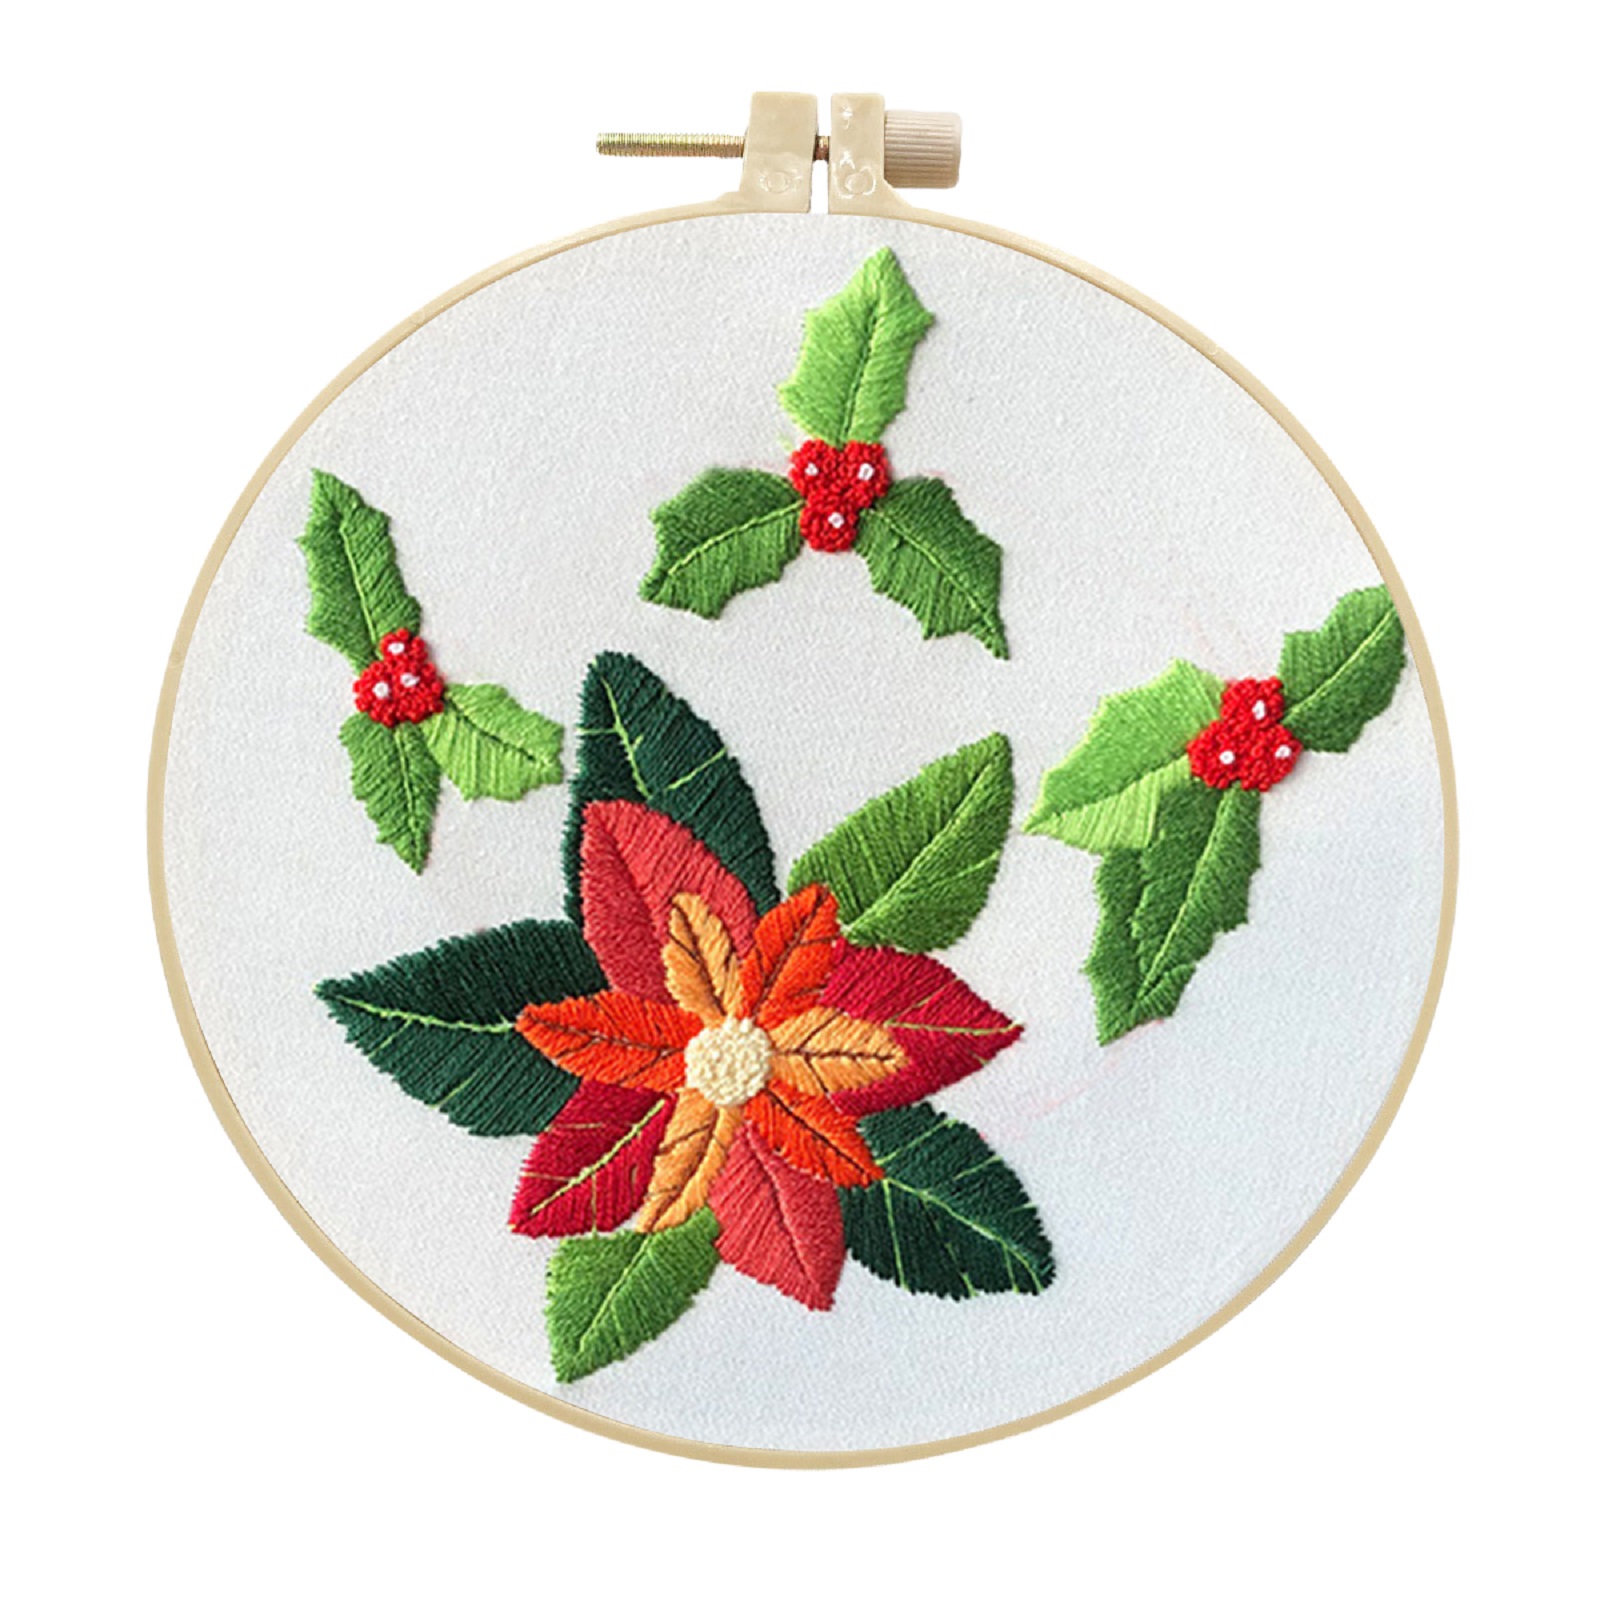 Embroidery kit with Patterns and Instructions for Adult Beginner - Christmas Flowers Pattern